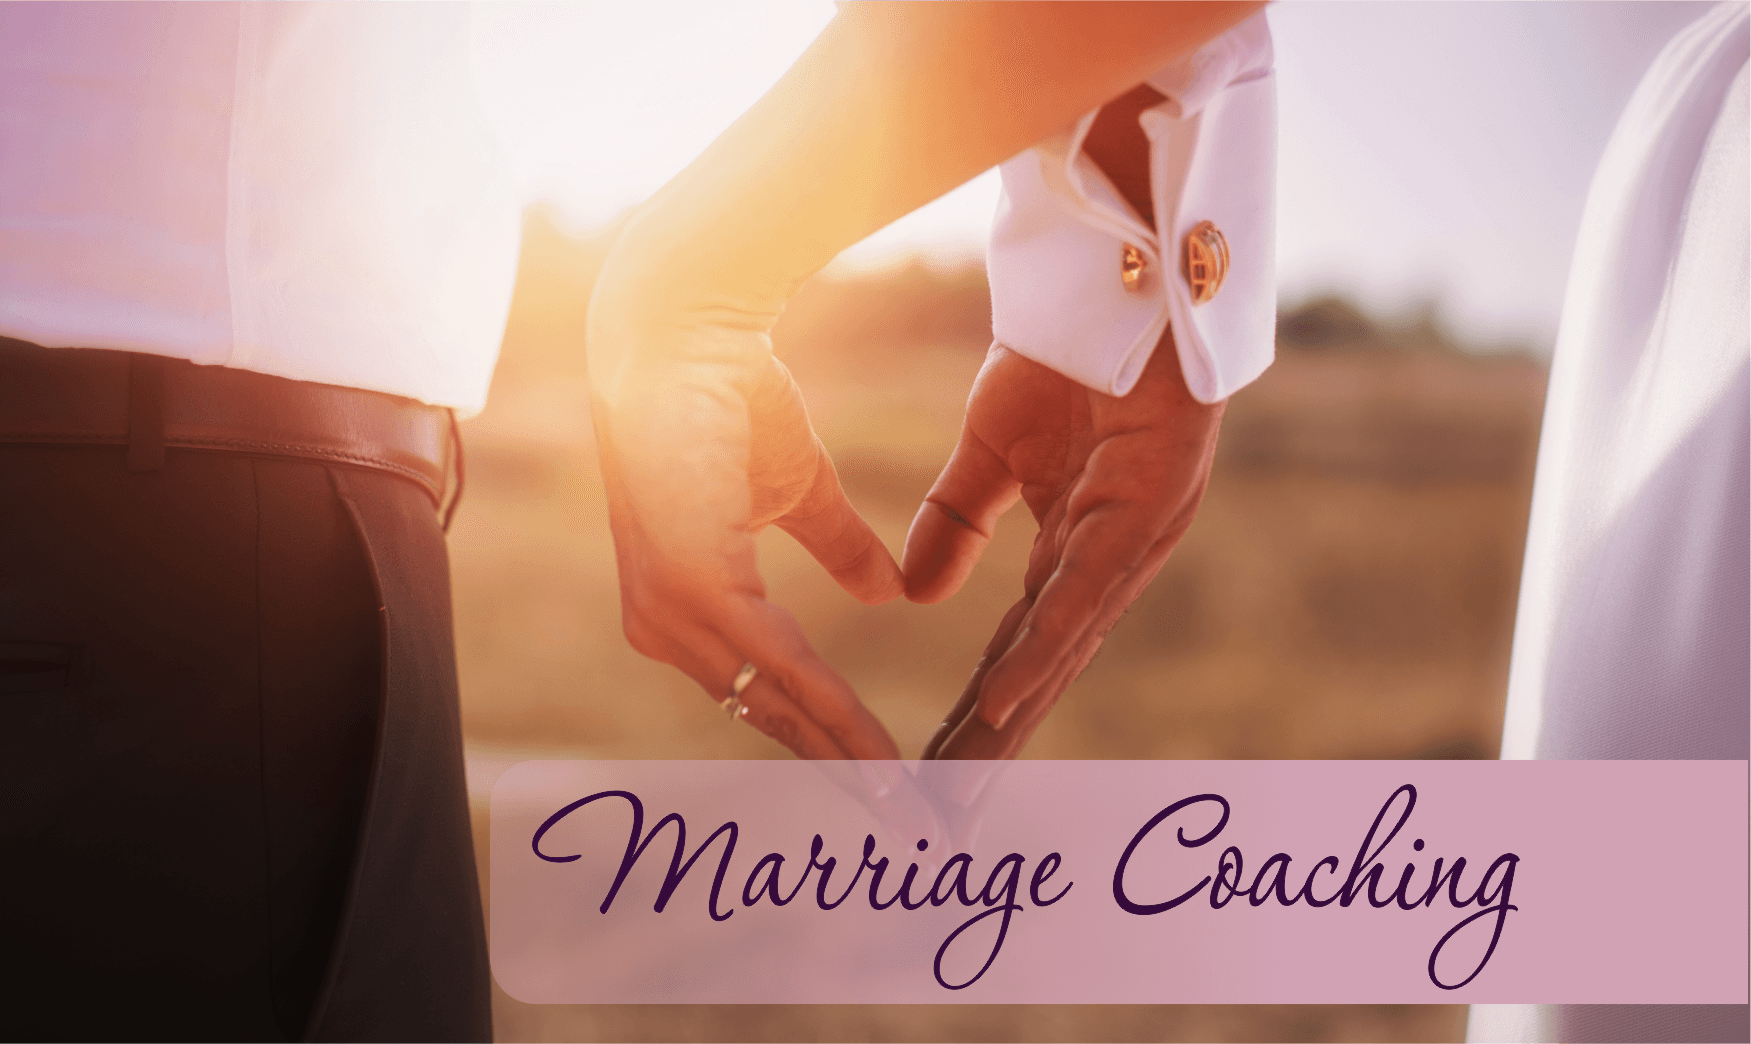 Marriage Coaching at PCCCA